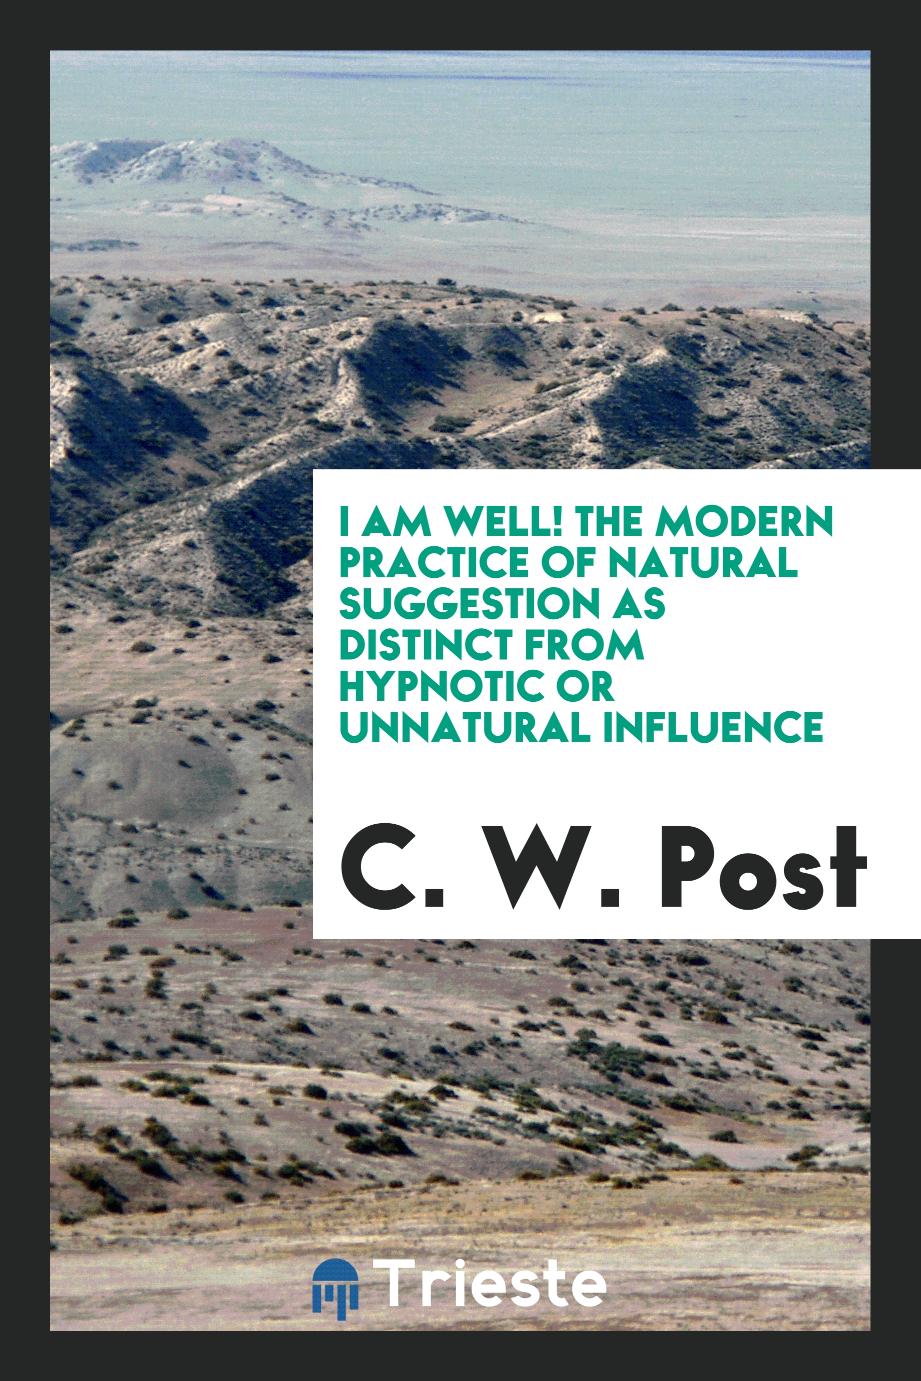 I Am Well! The Modern Practice of Natural Suggestion as Distinct from Hypnotic or Unnatural Influence